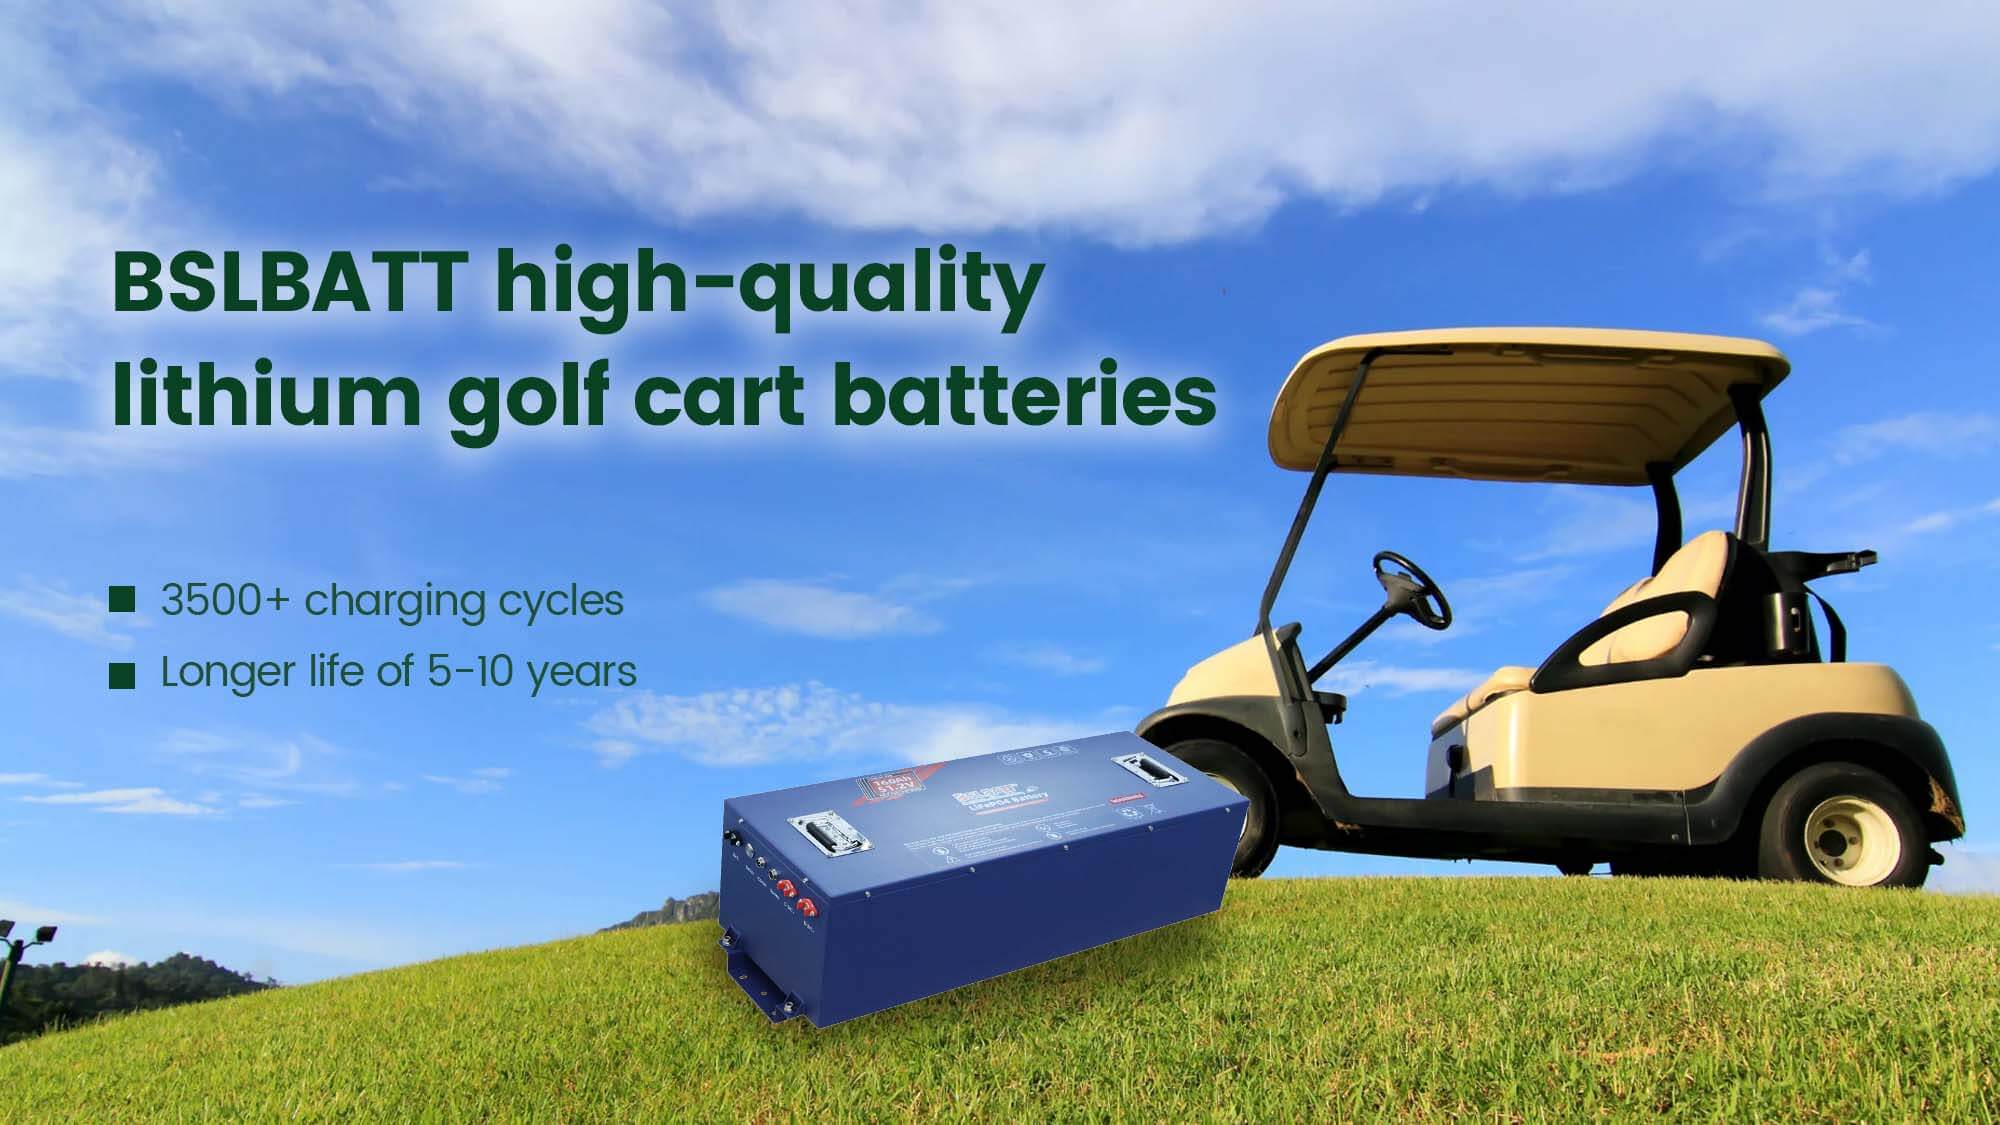 Lithium golf cart batteries are the next big thing to replace lead-acid golf cart batteries